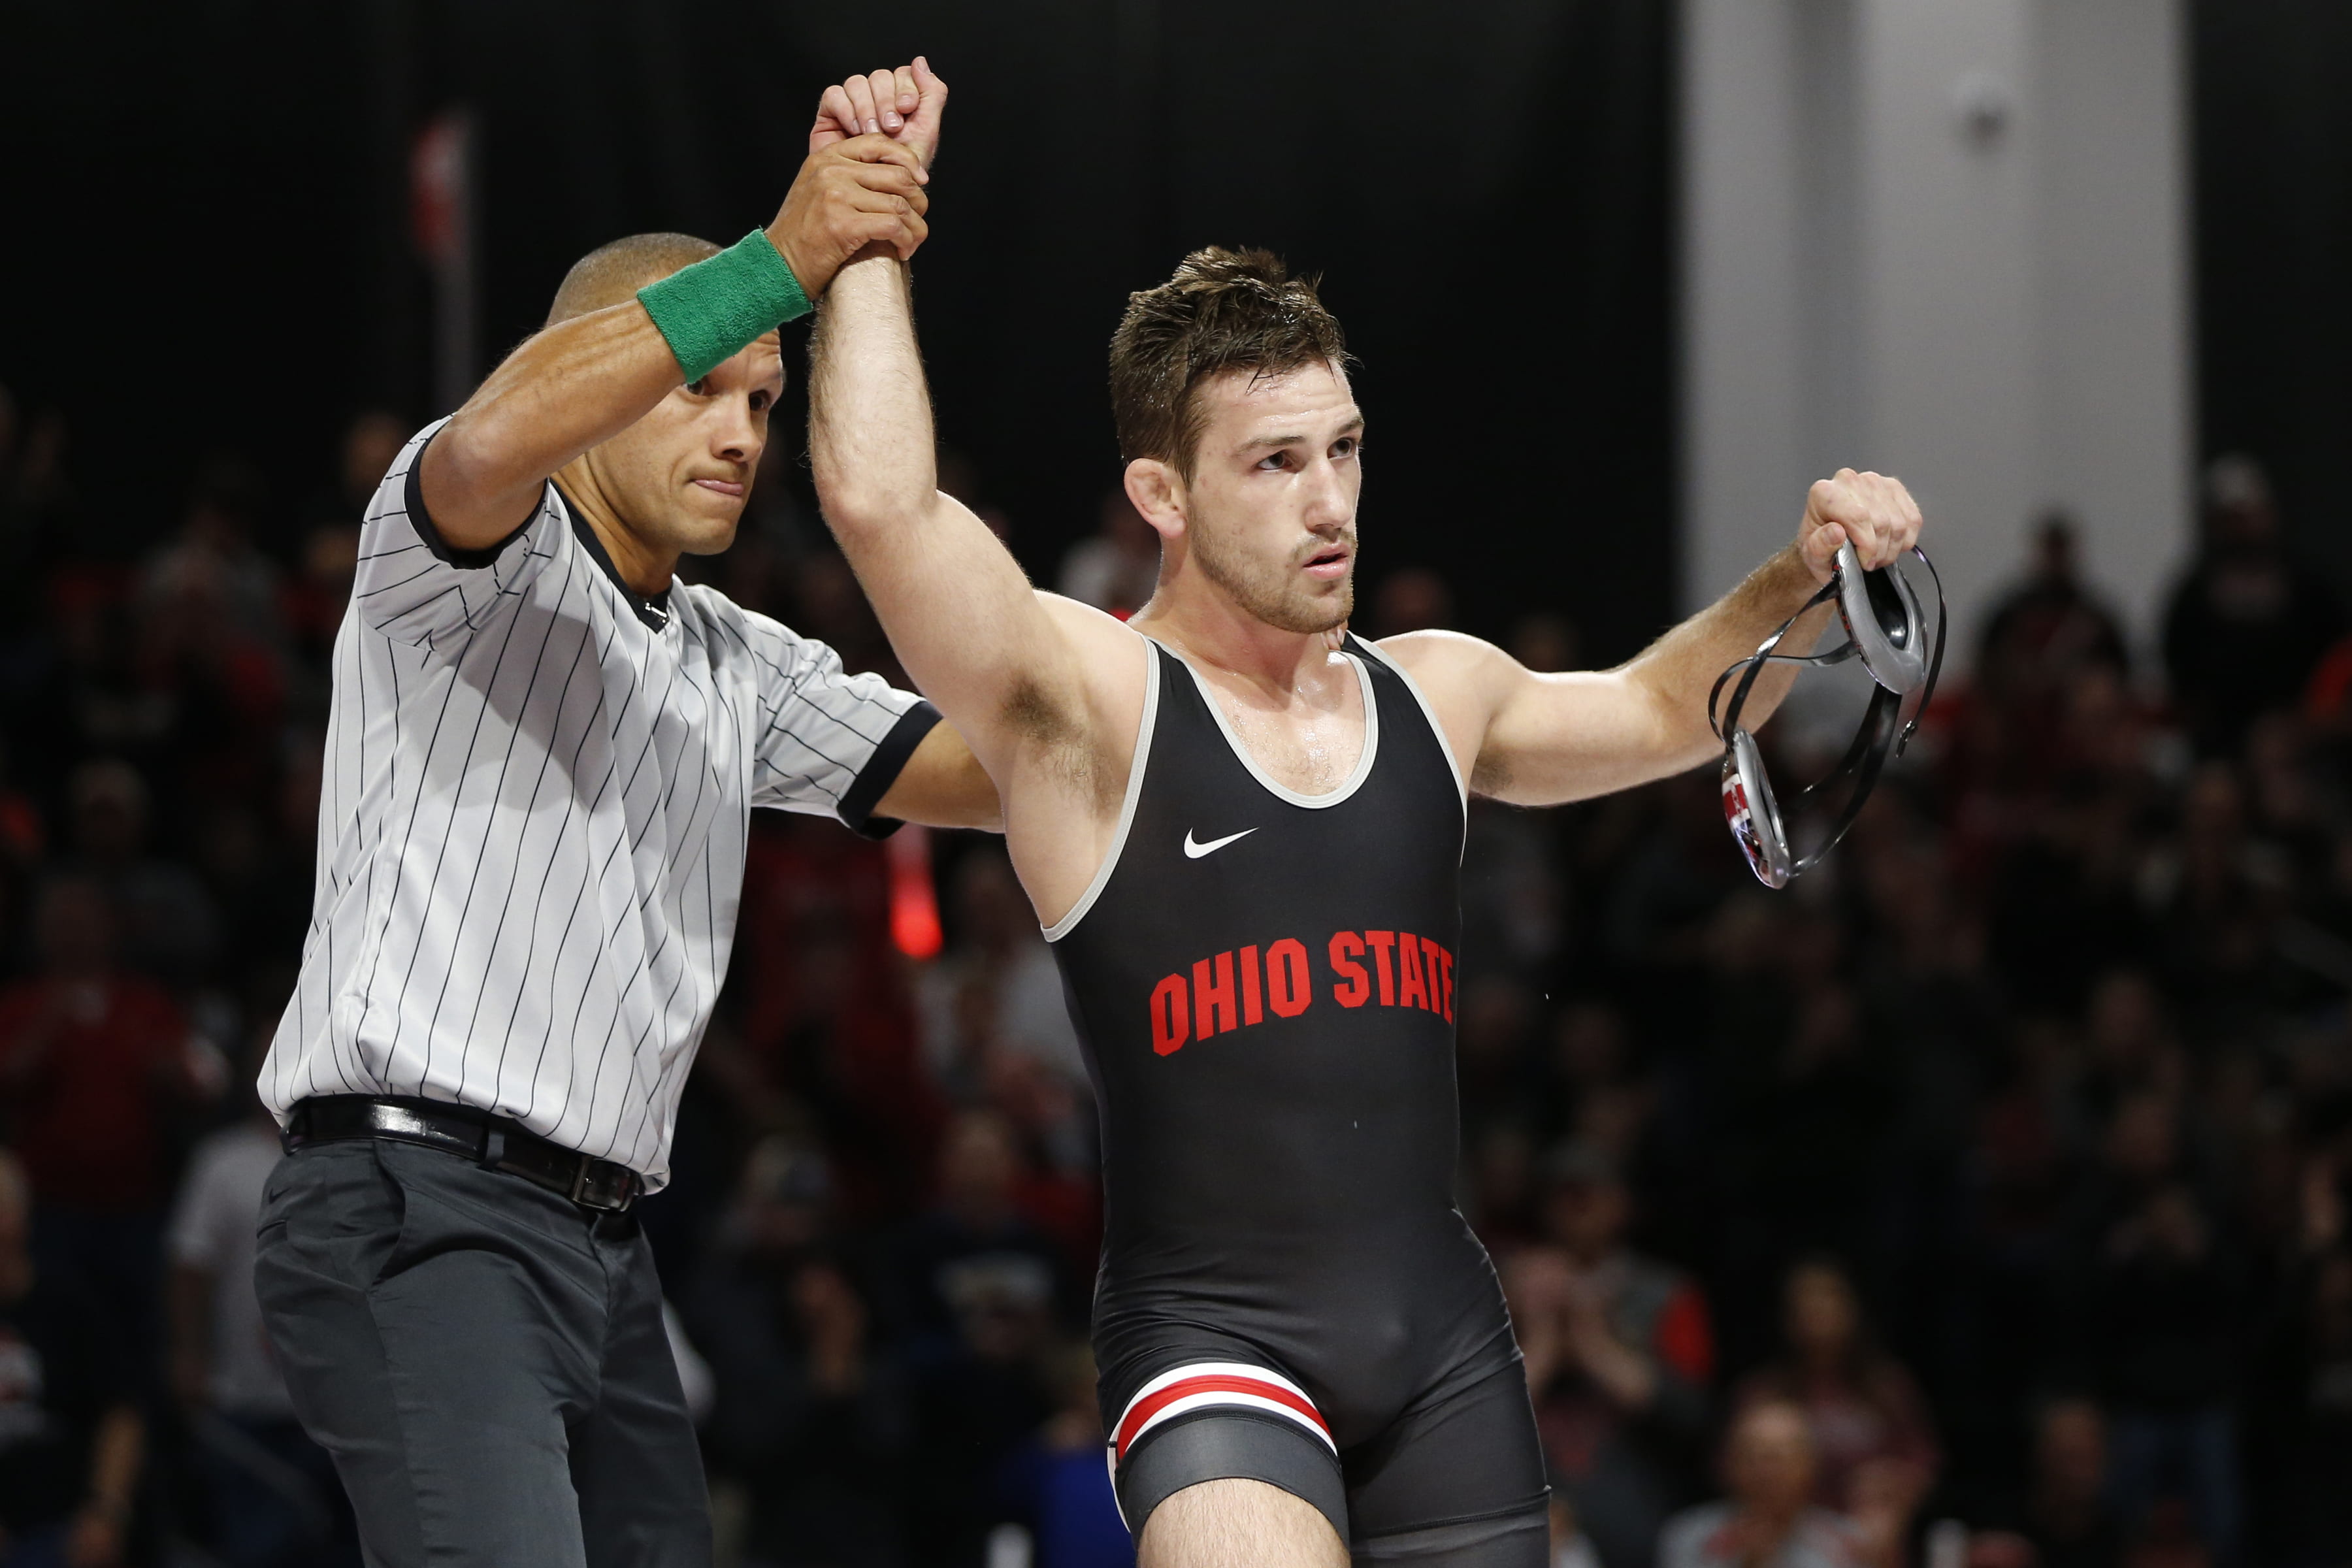 Wrestling: No. 4 Ohio State faces back-to-back ranked road tests ...